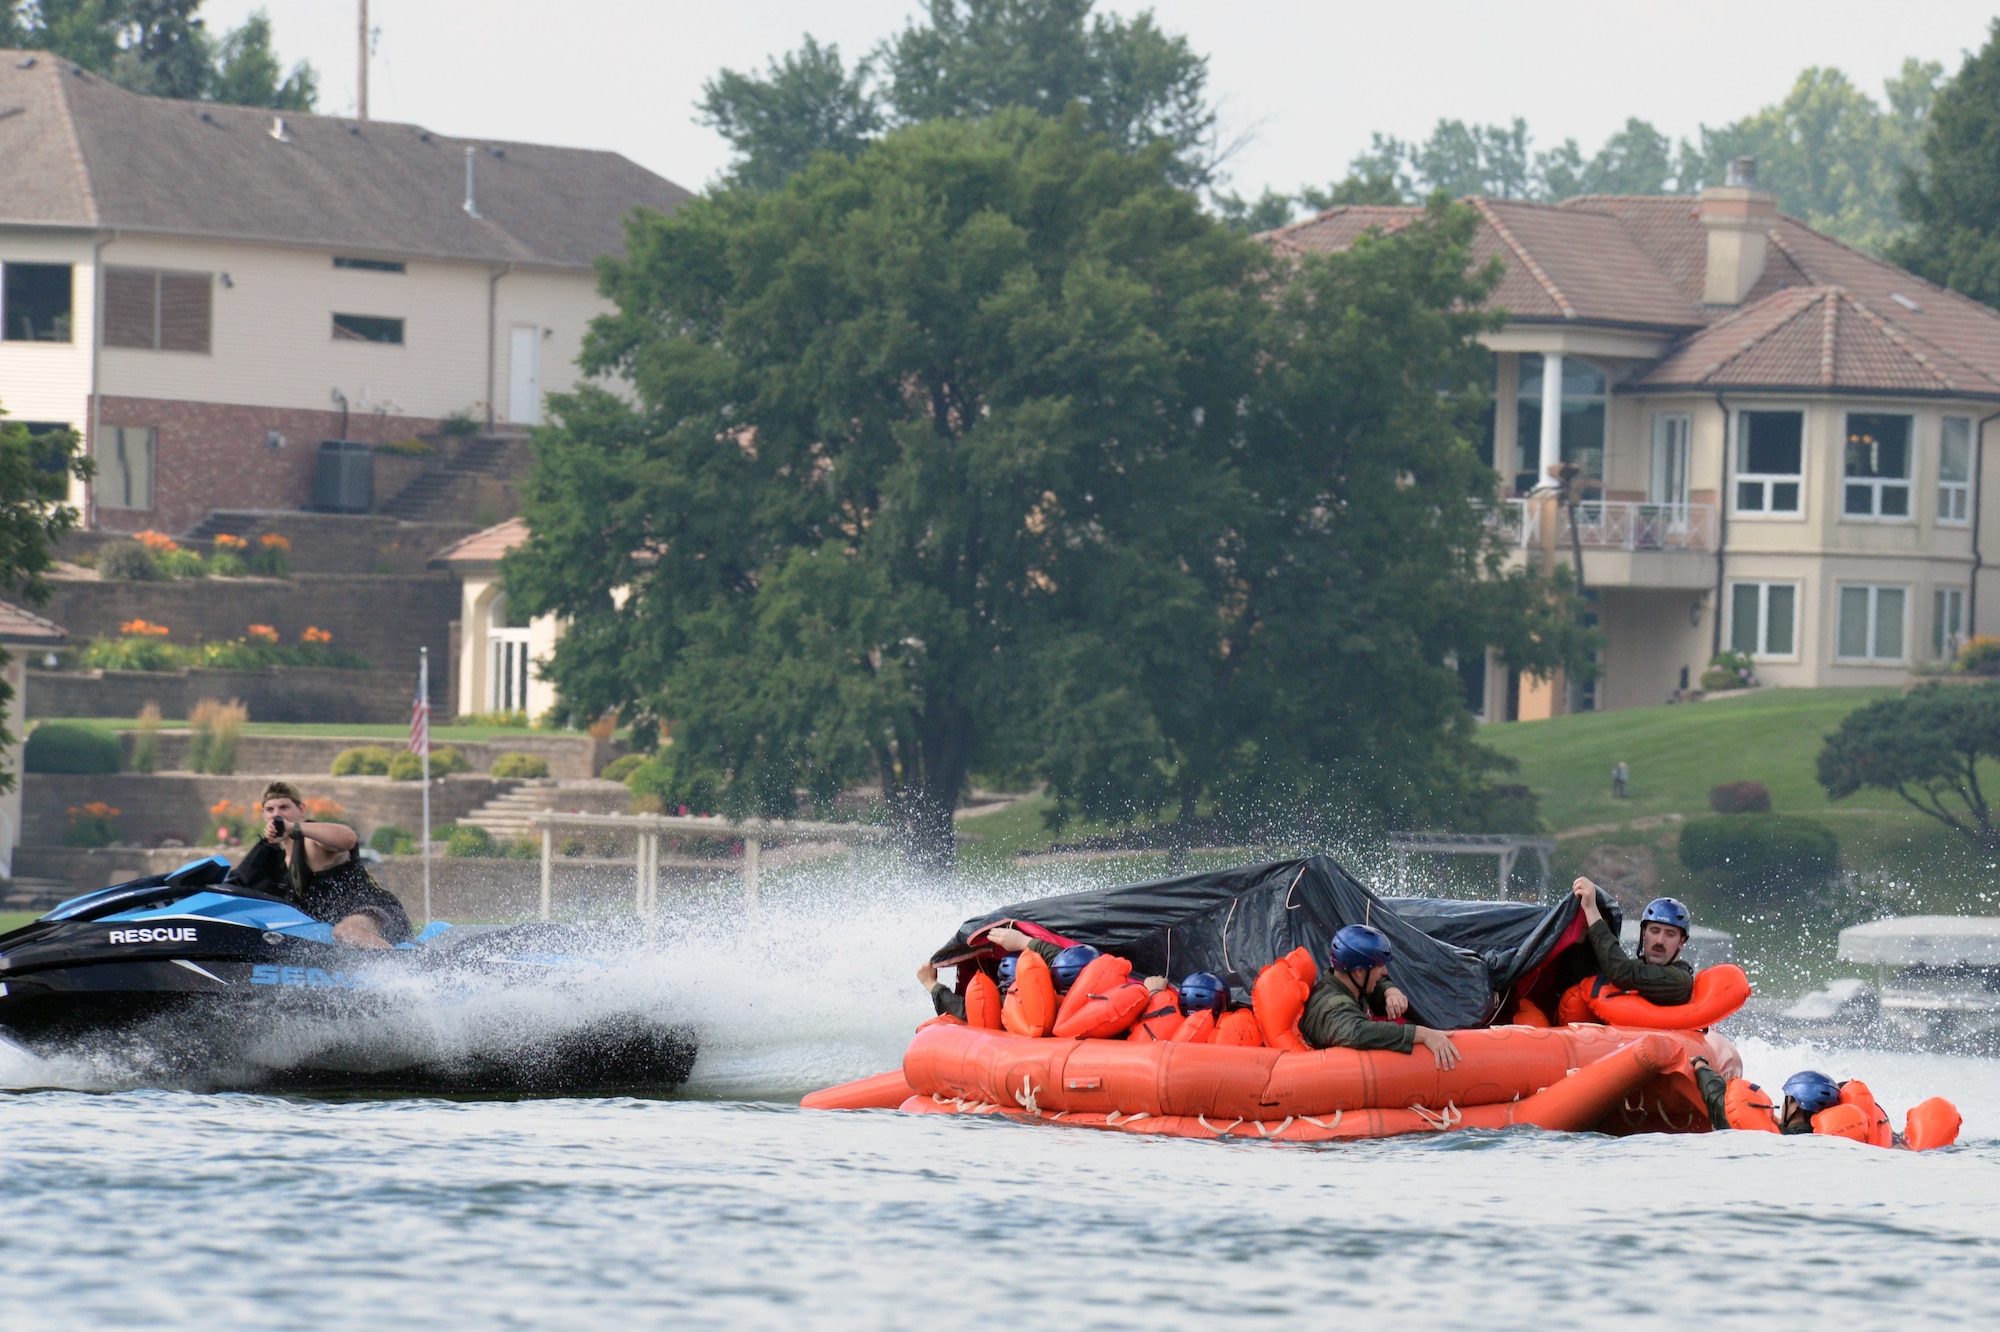 170th Group Citizen Airmen, assigned to Offutt Air Force Base, Nebraska, prepare their raft for rough seas, simulated by Staff Sgt. Kevin Battista, 55th Operational Support Squadron Survival Evasion Resistance Escape specialist, while participating in water survival and rescue training July 14, 2018. The aircrew members were briefed on the availability and use of tools contained in their survival gear before putting academics and theory to the test in the waters of a local lake.